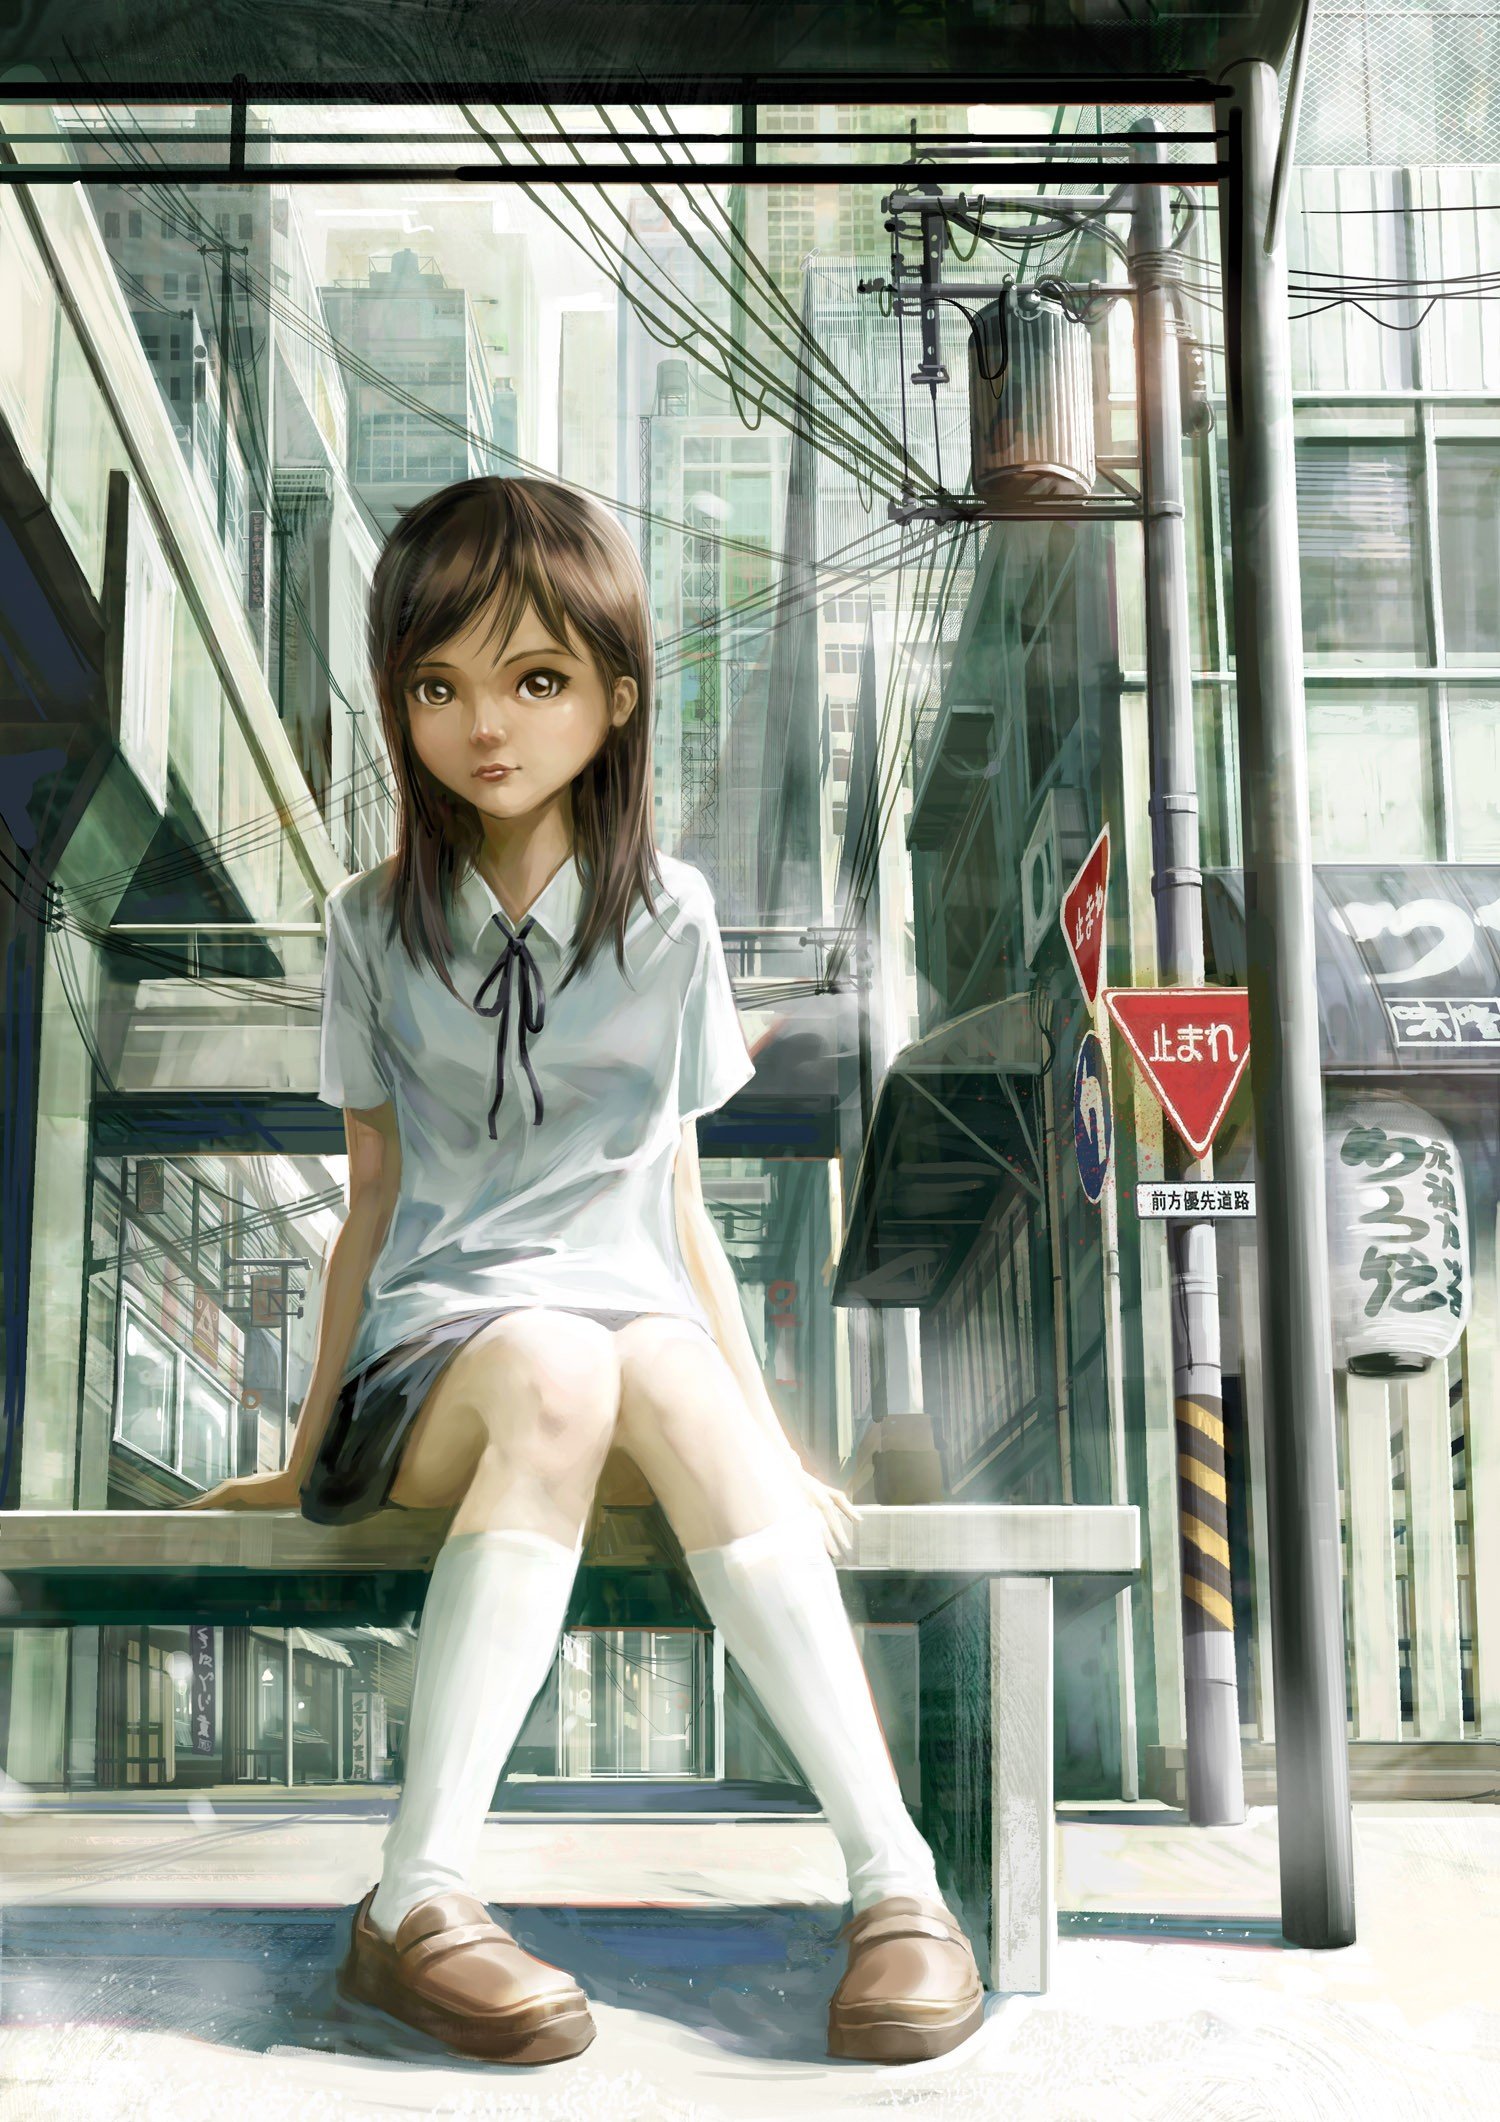 paintings, Landscapes, Cityscapes, Digital, Art, Drawings, Anime, Girls Wallpaper